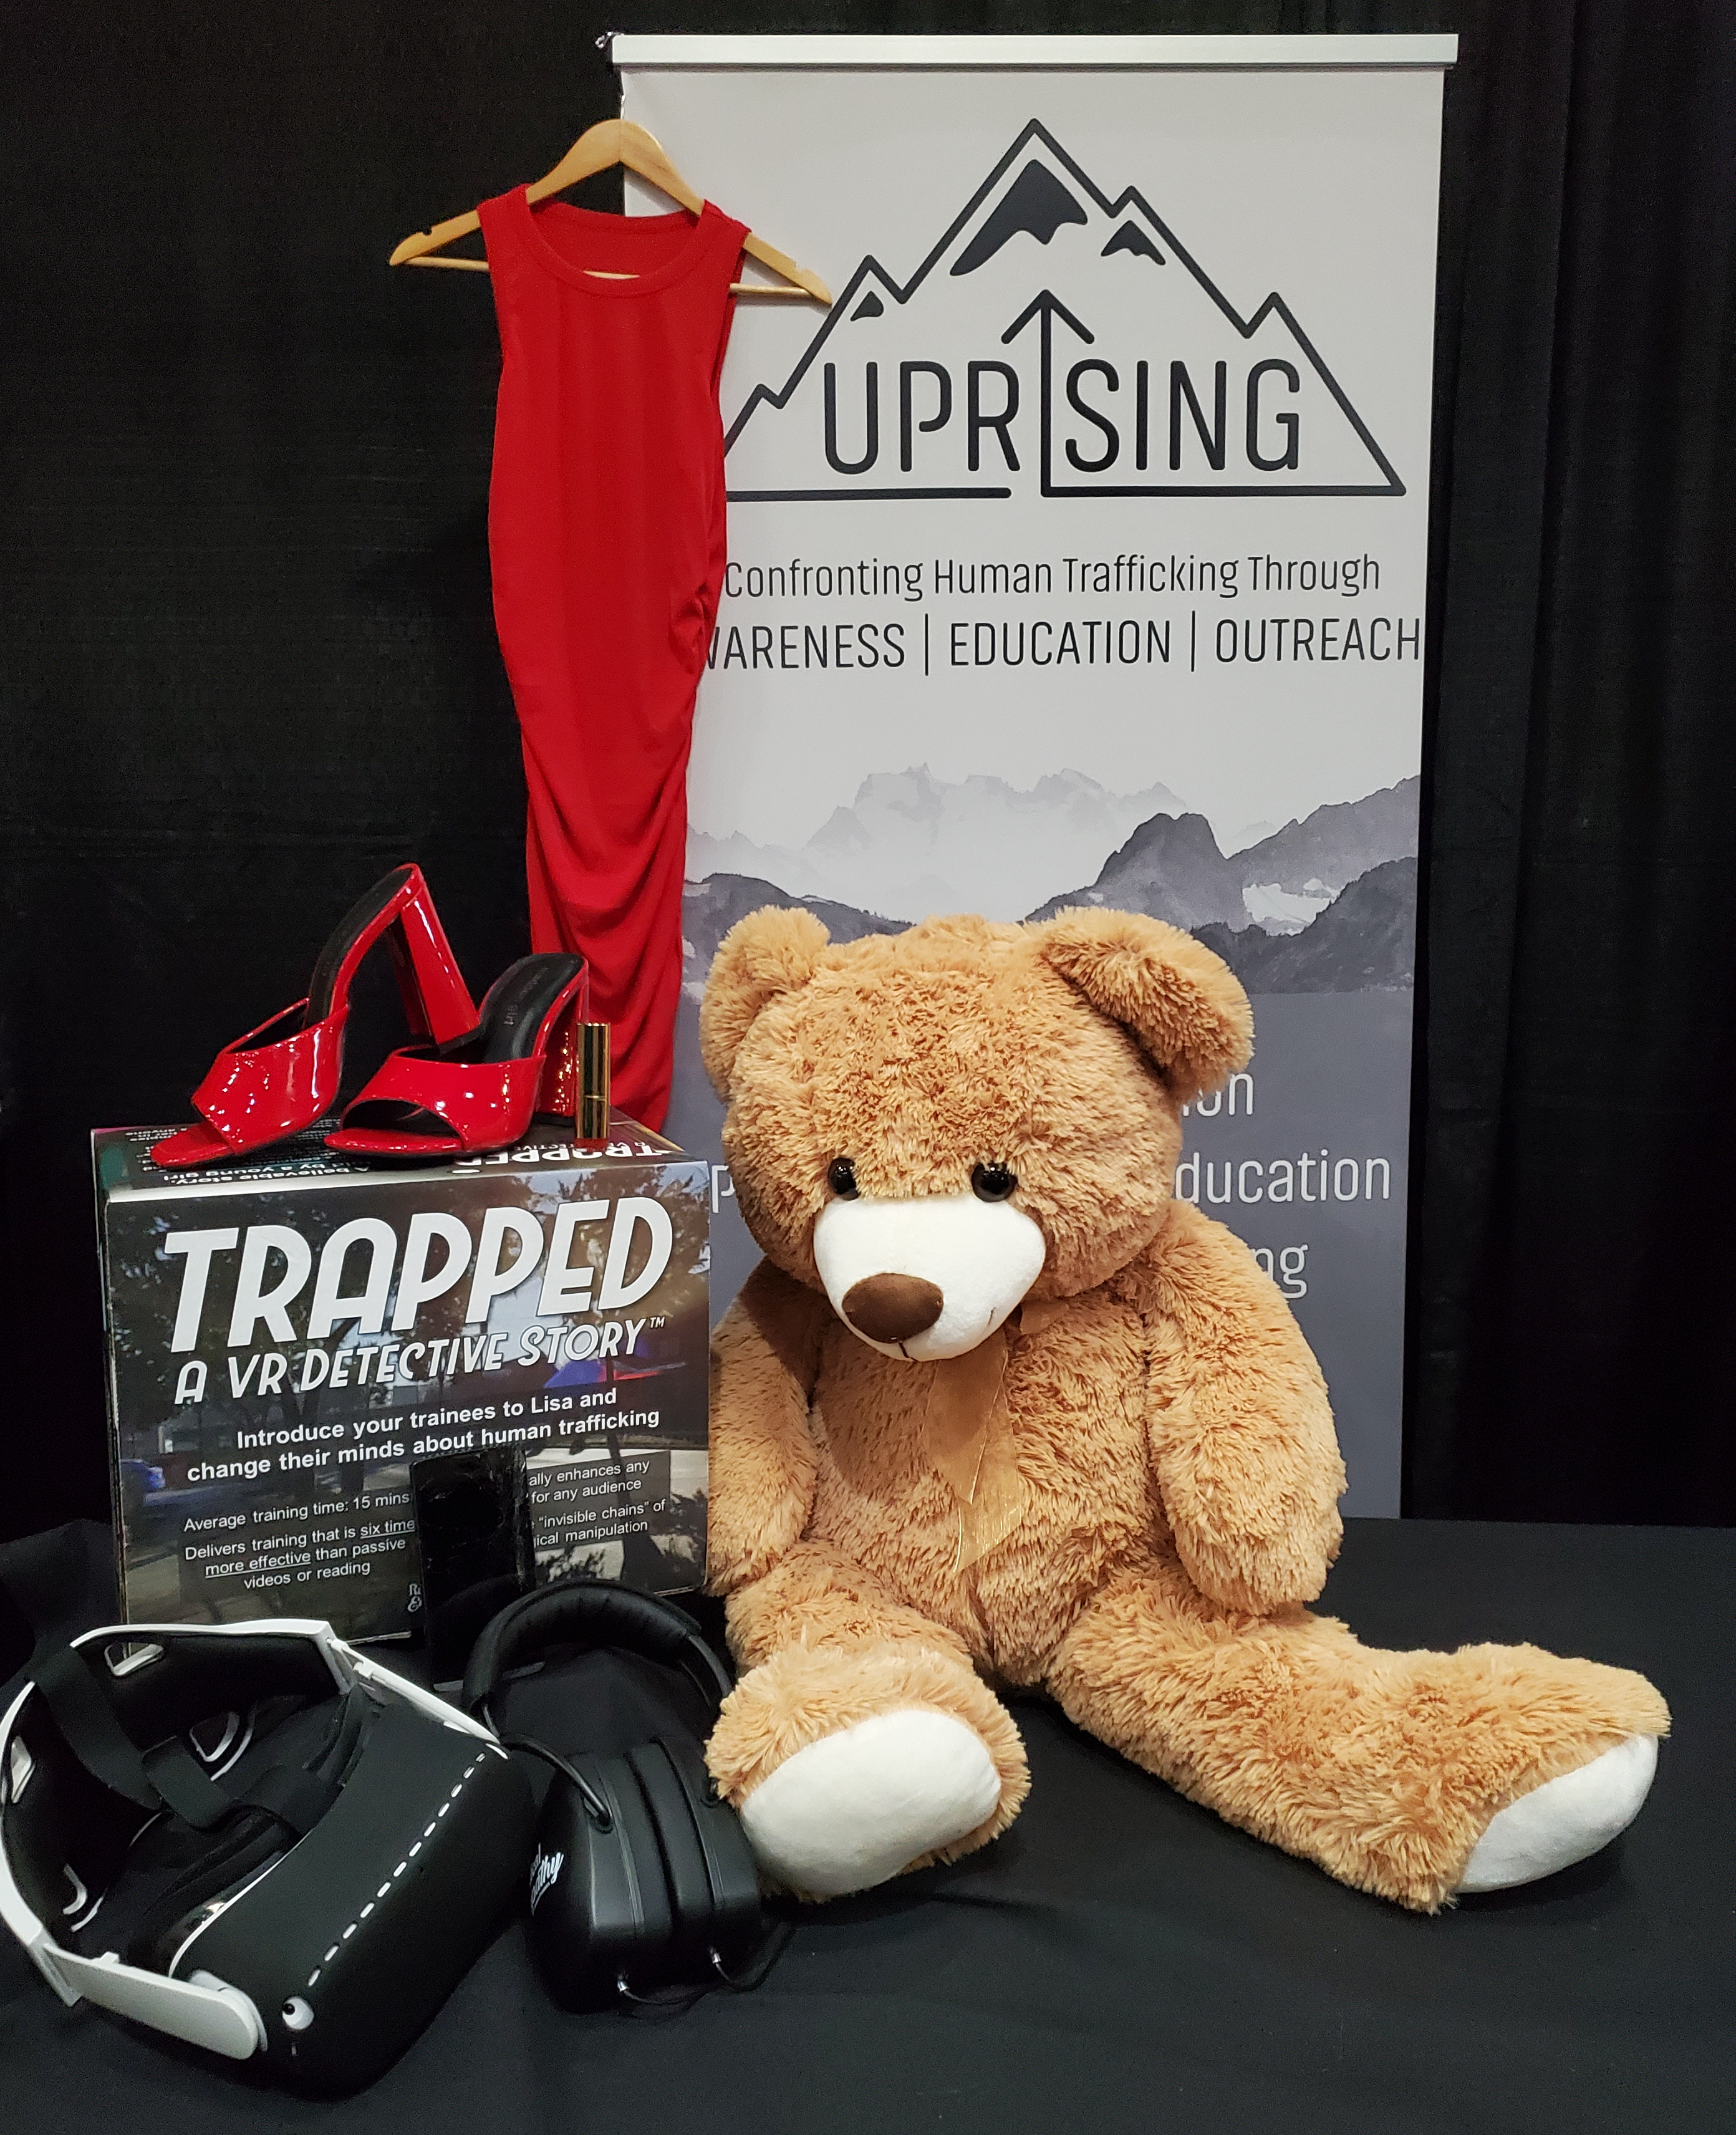 Uprising purchased physical models of the virtual objects from TRAPPED. Pictured here are Lisa's teddy bear, dress, shoes, lipstick, and her cell phone. All of these are important parts of Lisa's life, and seeing them can make a dramatic impact for trainees.